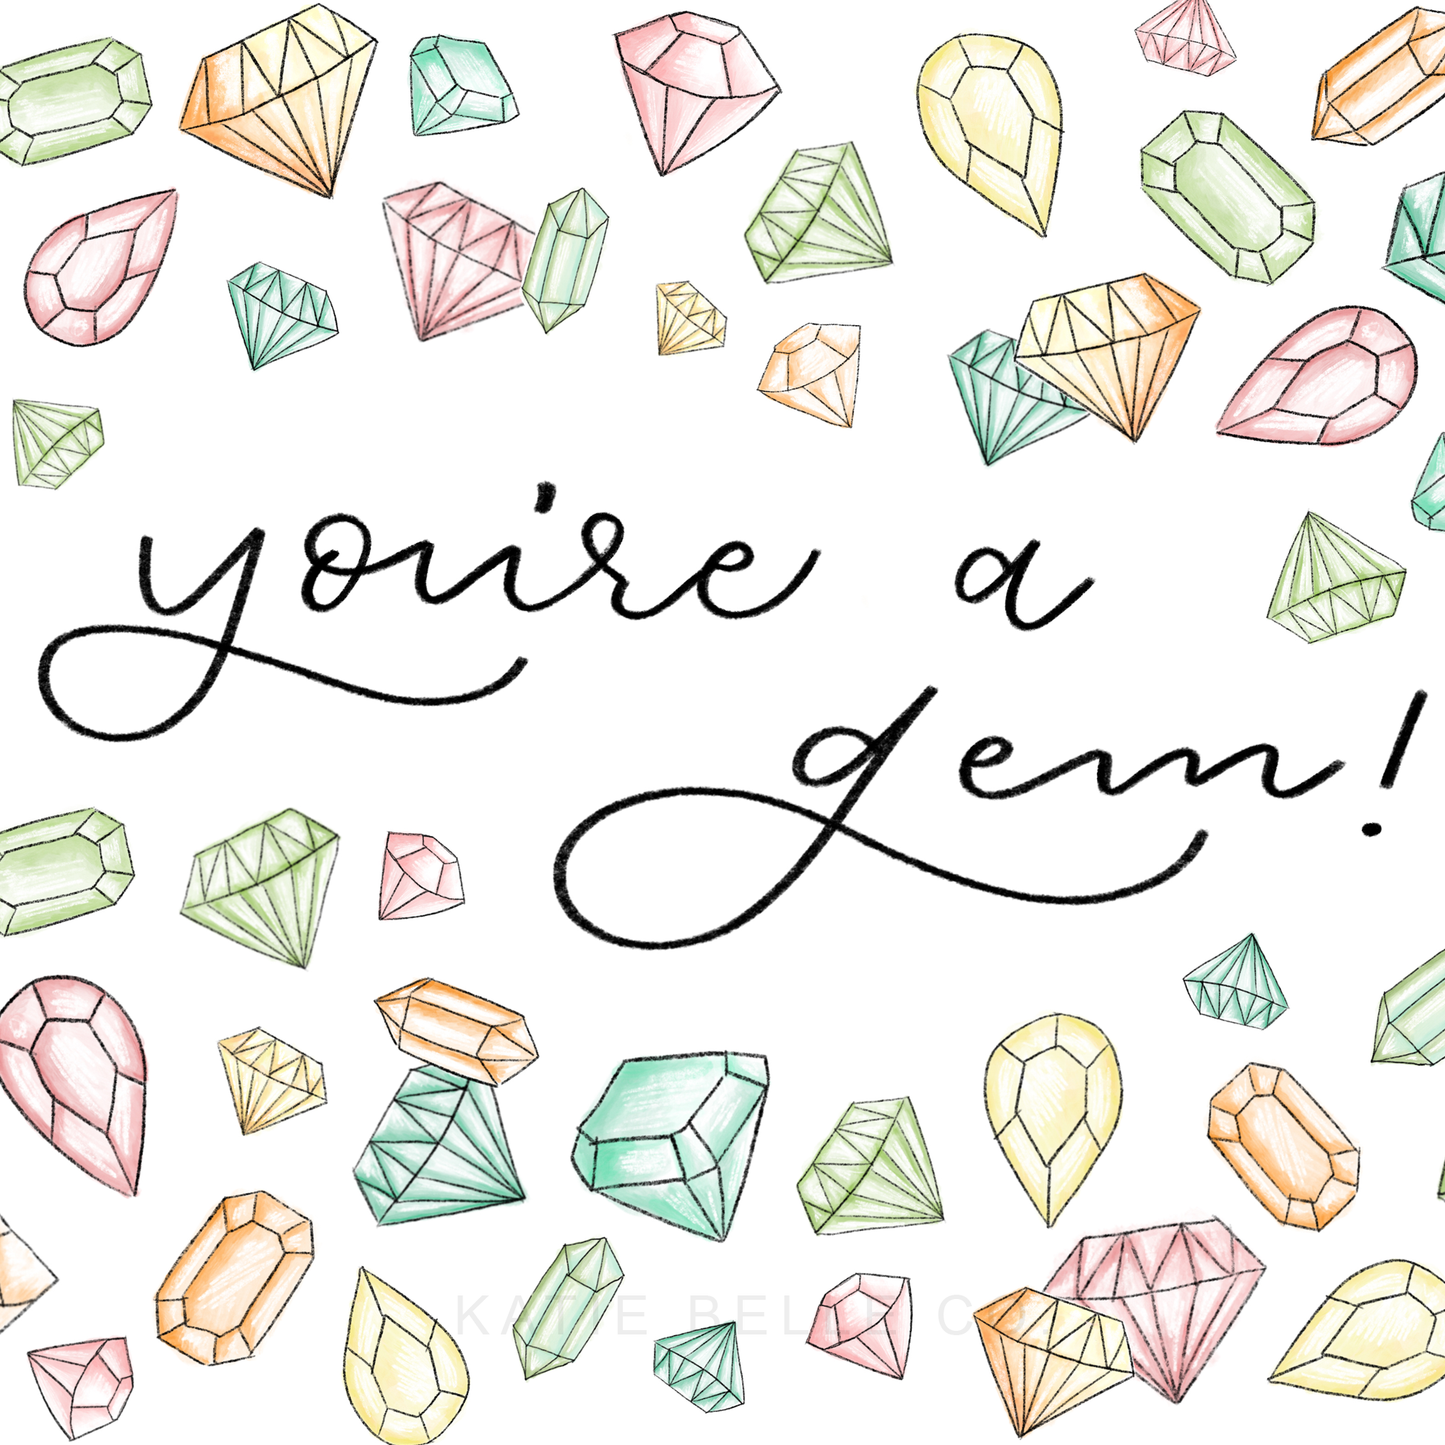 you're a gem. greeting card. appreciation card. everyday greeting card. diamonds. crystals. rocks. katie belle co. A2 size. folded greeting card. Bring a sparkle of appreciation to someone special with this YOU'RE A GEM Greeting Card! Featuring a stunning selection of gems, diamonds, and crystals in pastel colors, and hand-lettered font, this card is perfect to show your gratitude and admiration. Let your words shine with this beautiful card—it's the perfect way to show someone they're appreciated!